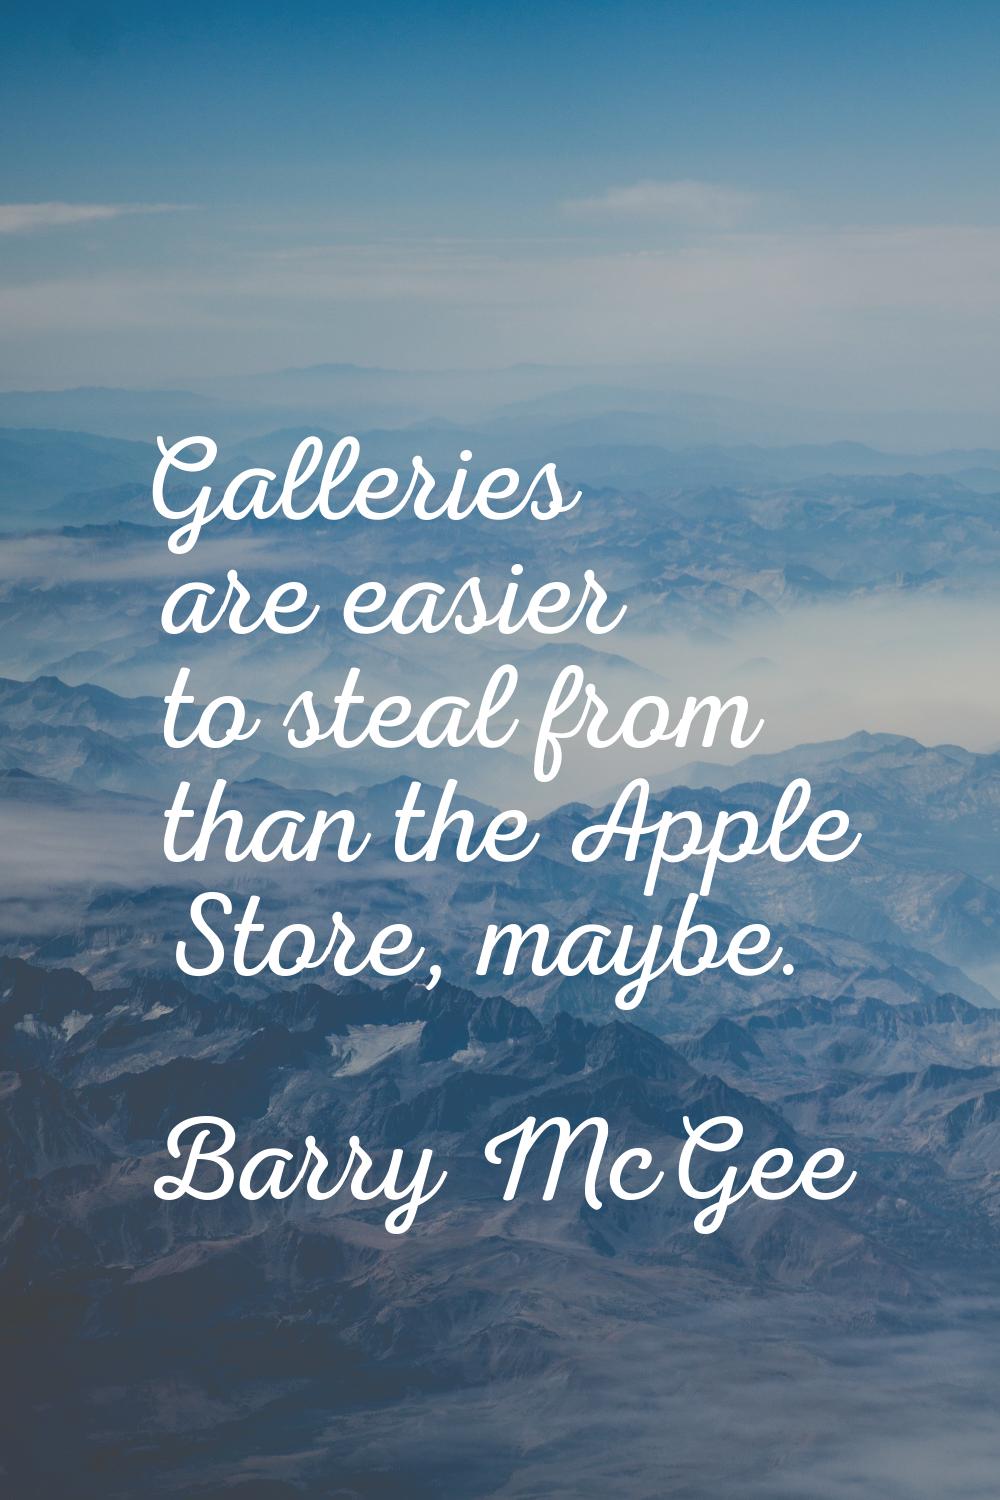 Galleries are easier to steal from than the Apple Store, maybe.